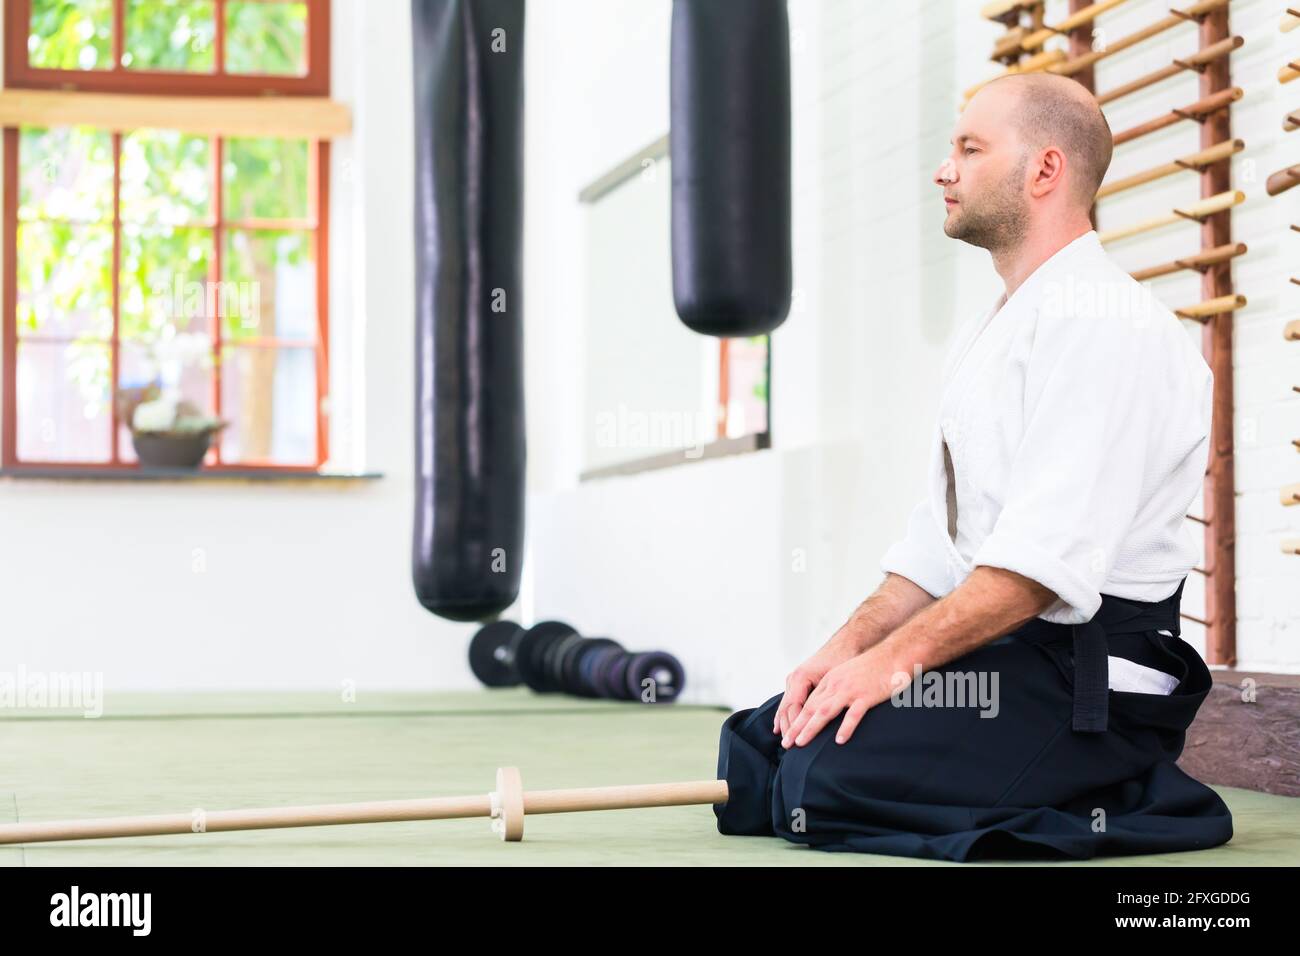 Man at Aikido martial arts training with wooden sword Stock Photo